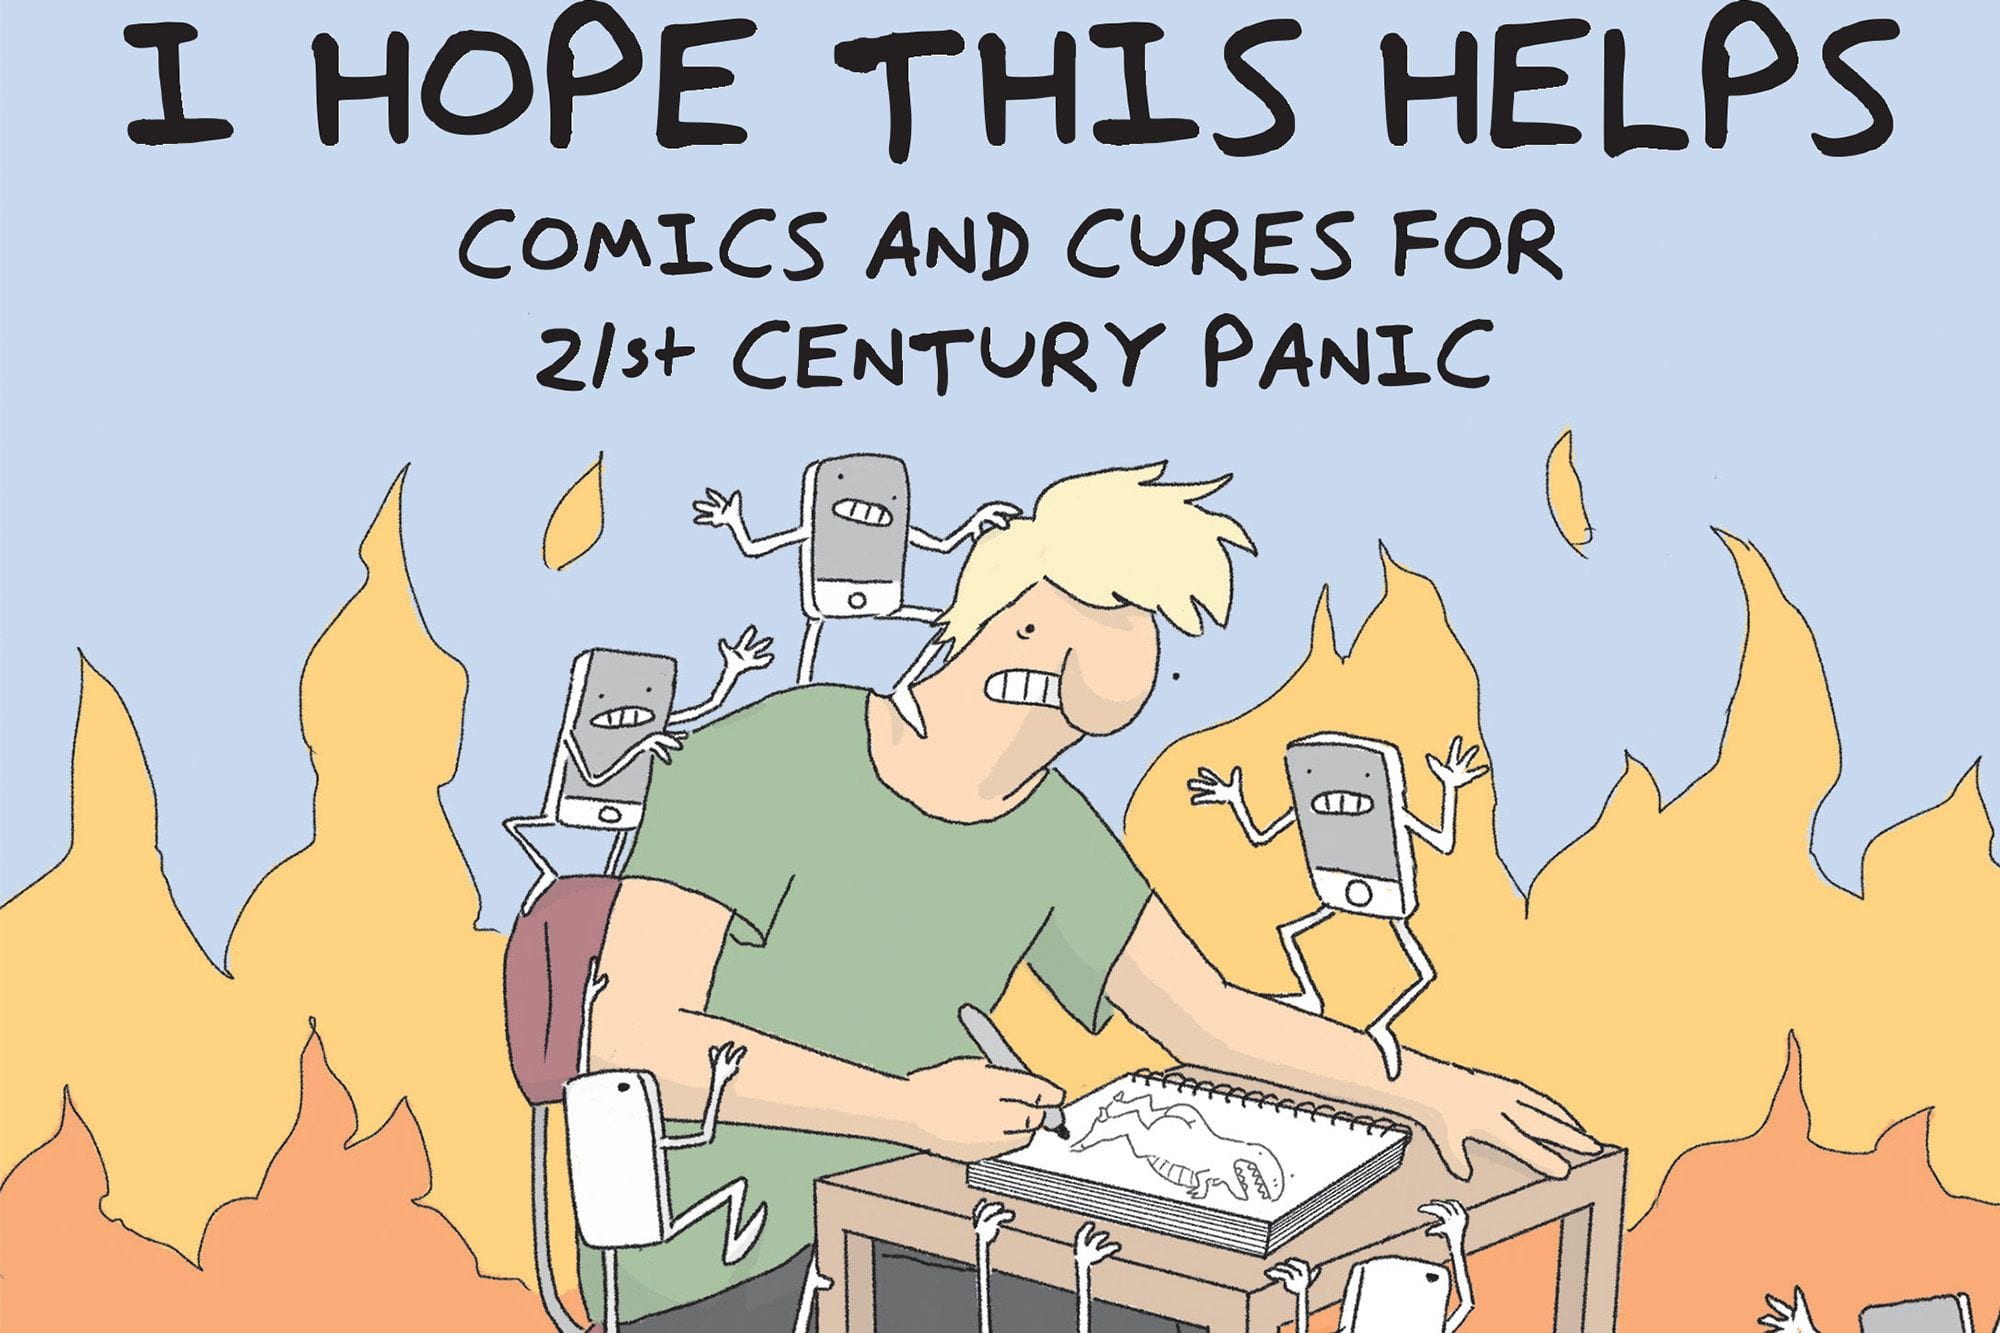 Tommy Siegel’s Comic ‘I Hope This Helps’ Pokes at Social Media Addiction